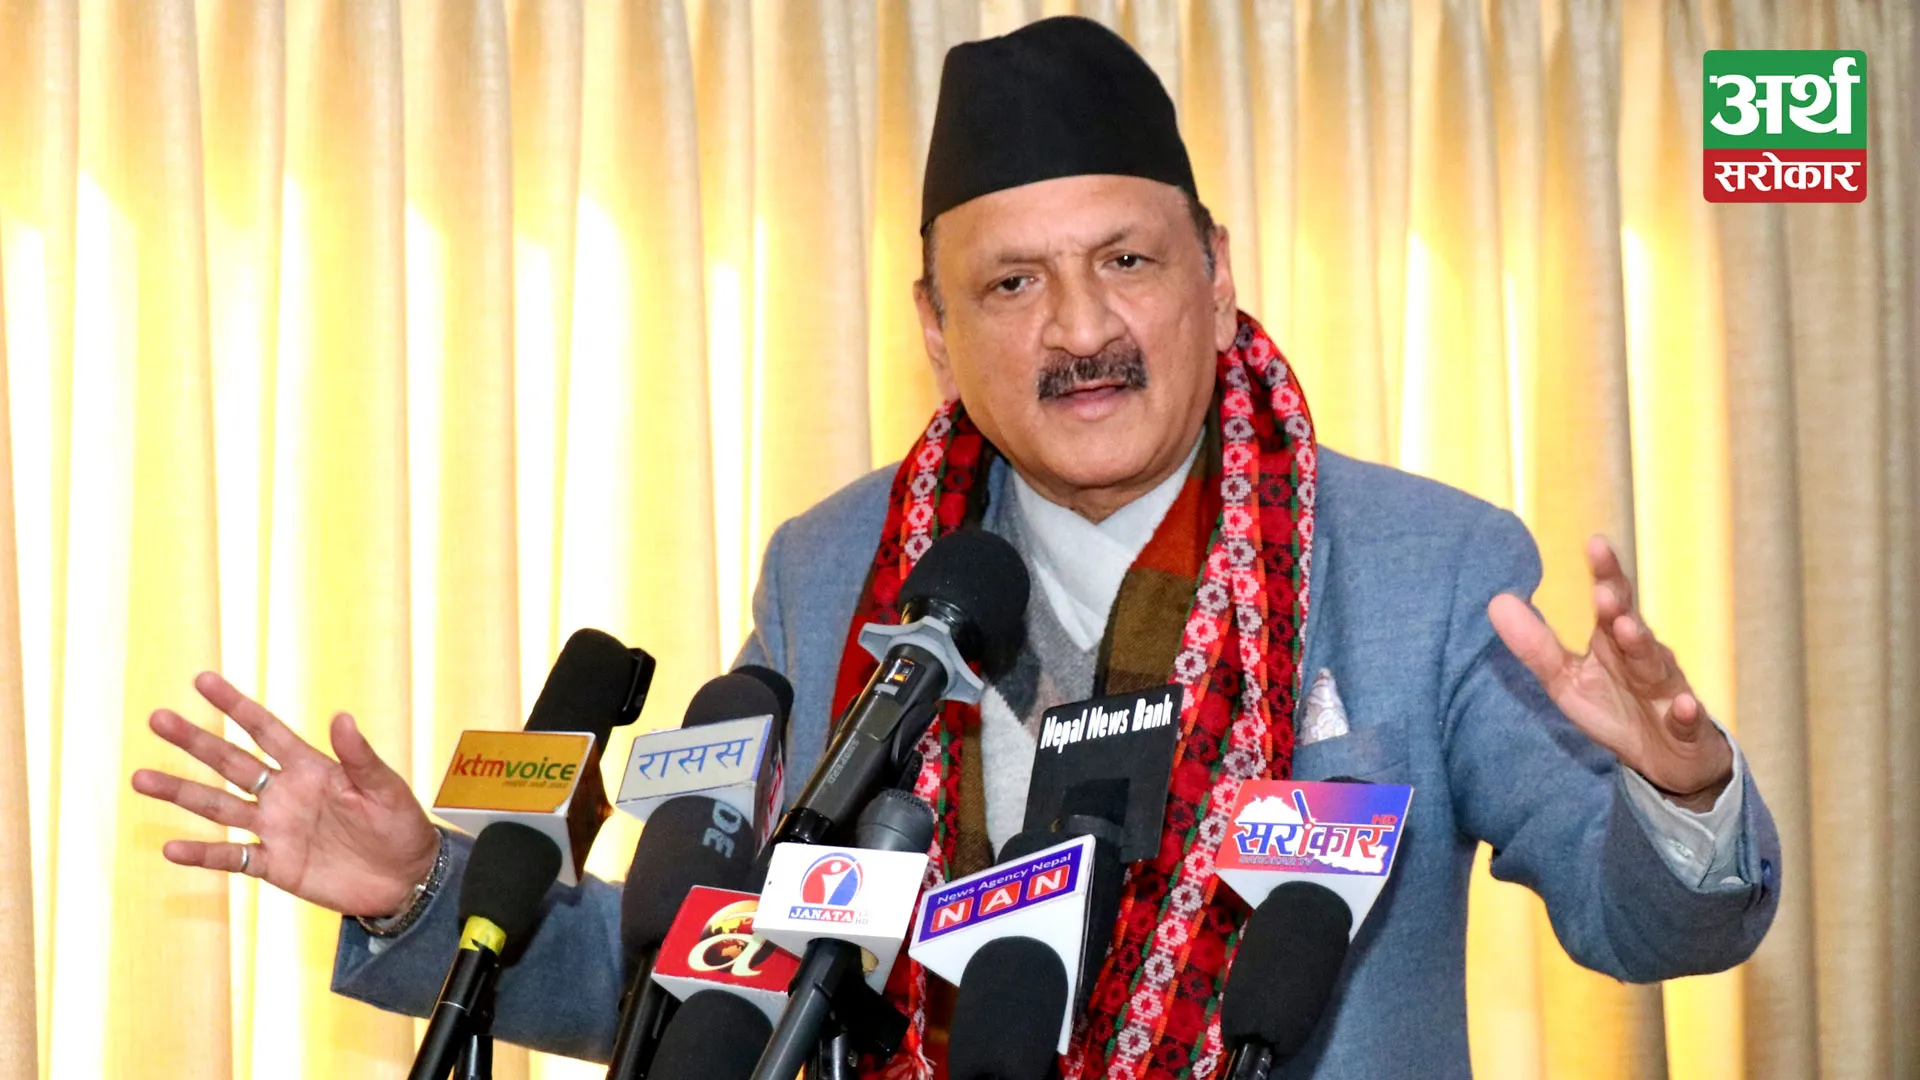 Economy is returning to normalcy: Finance Minister Mahat